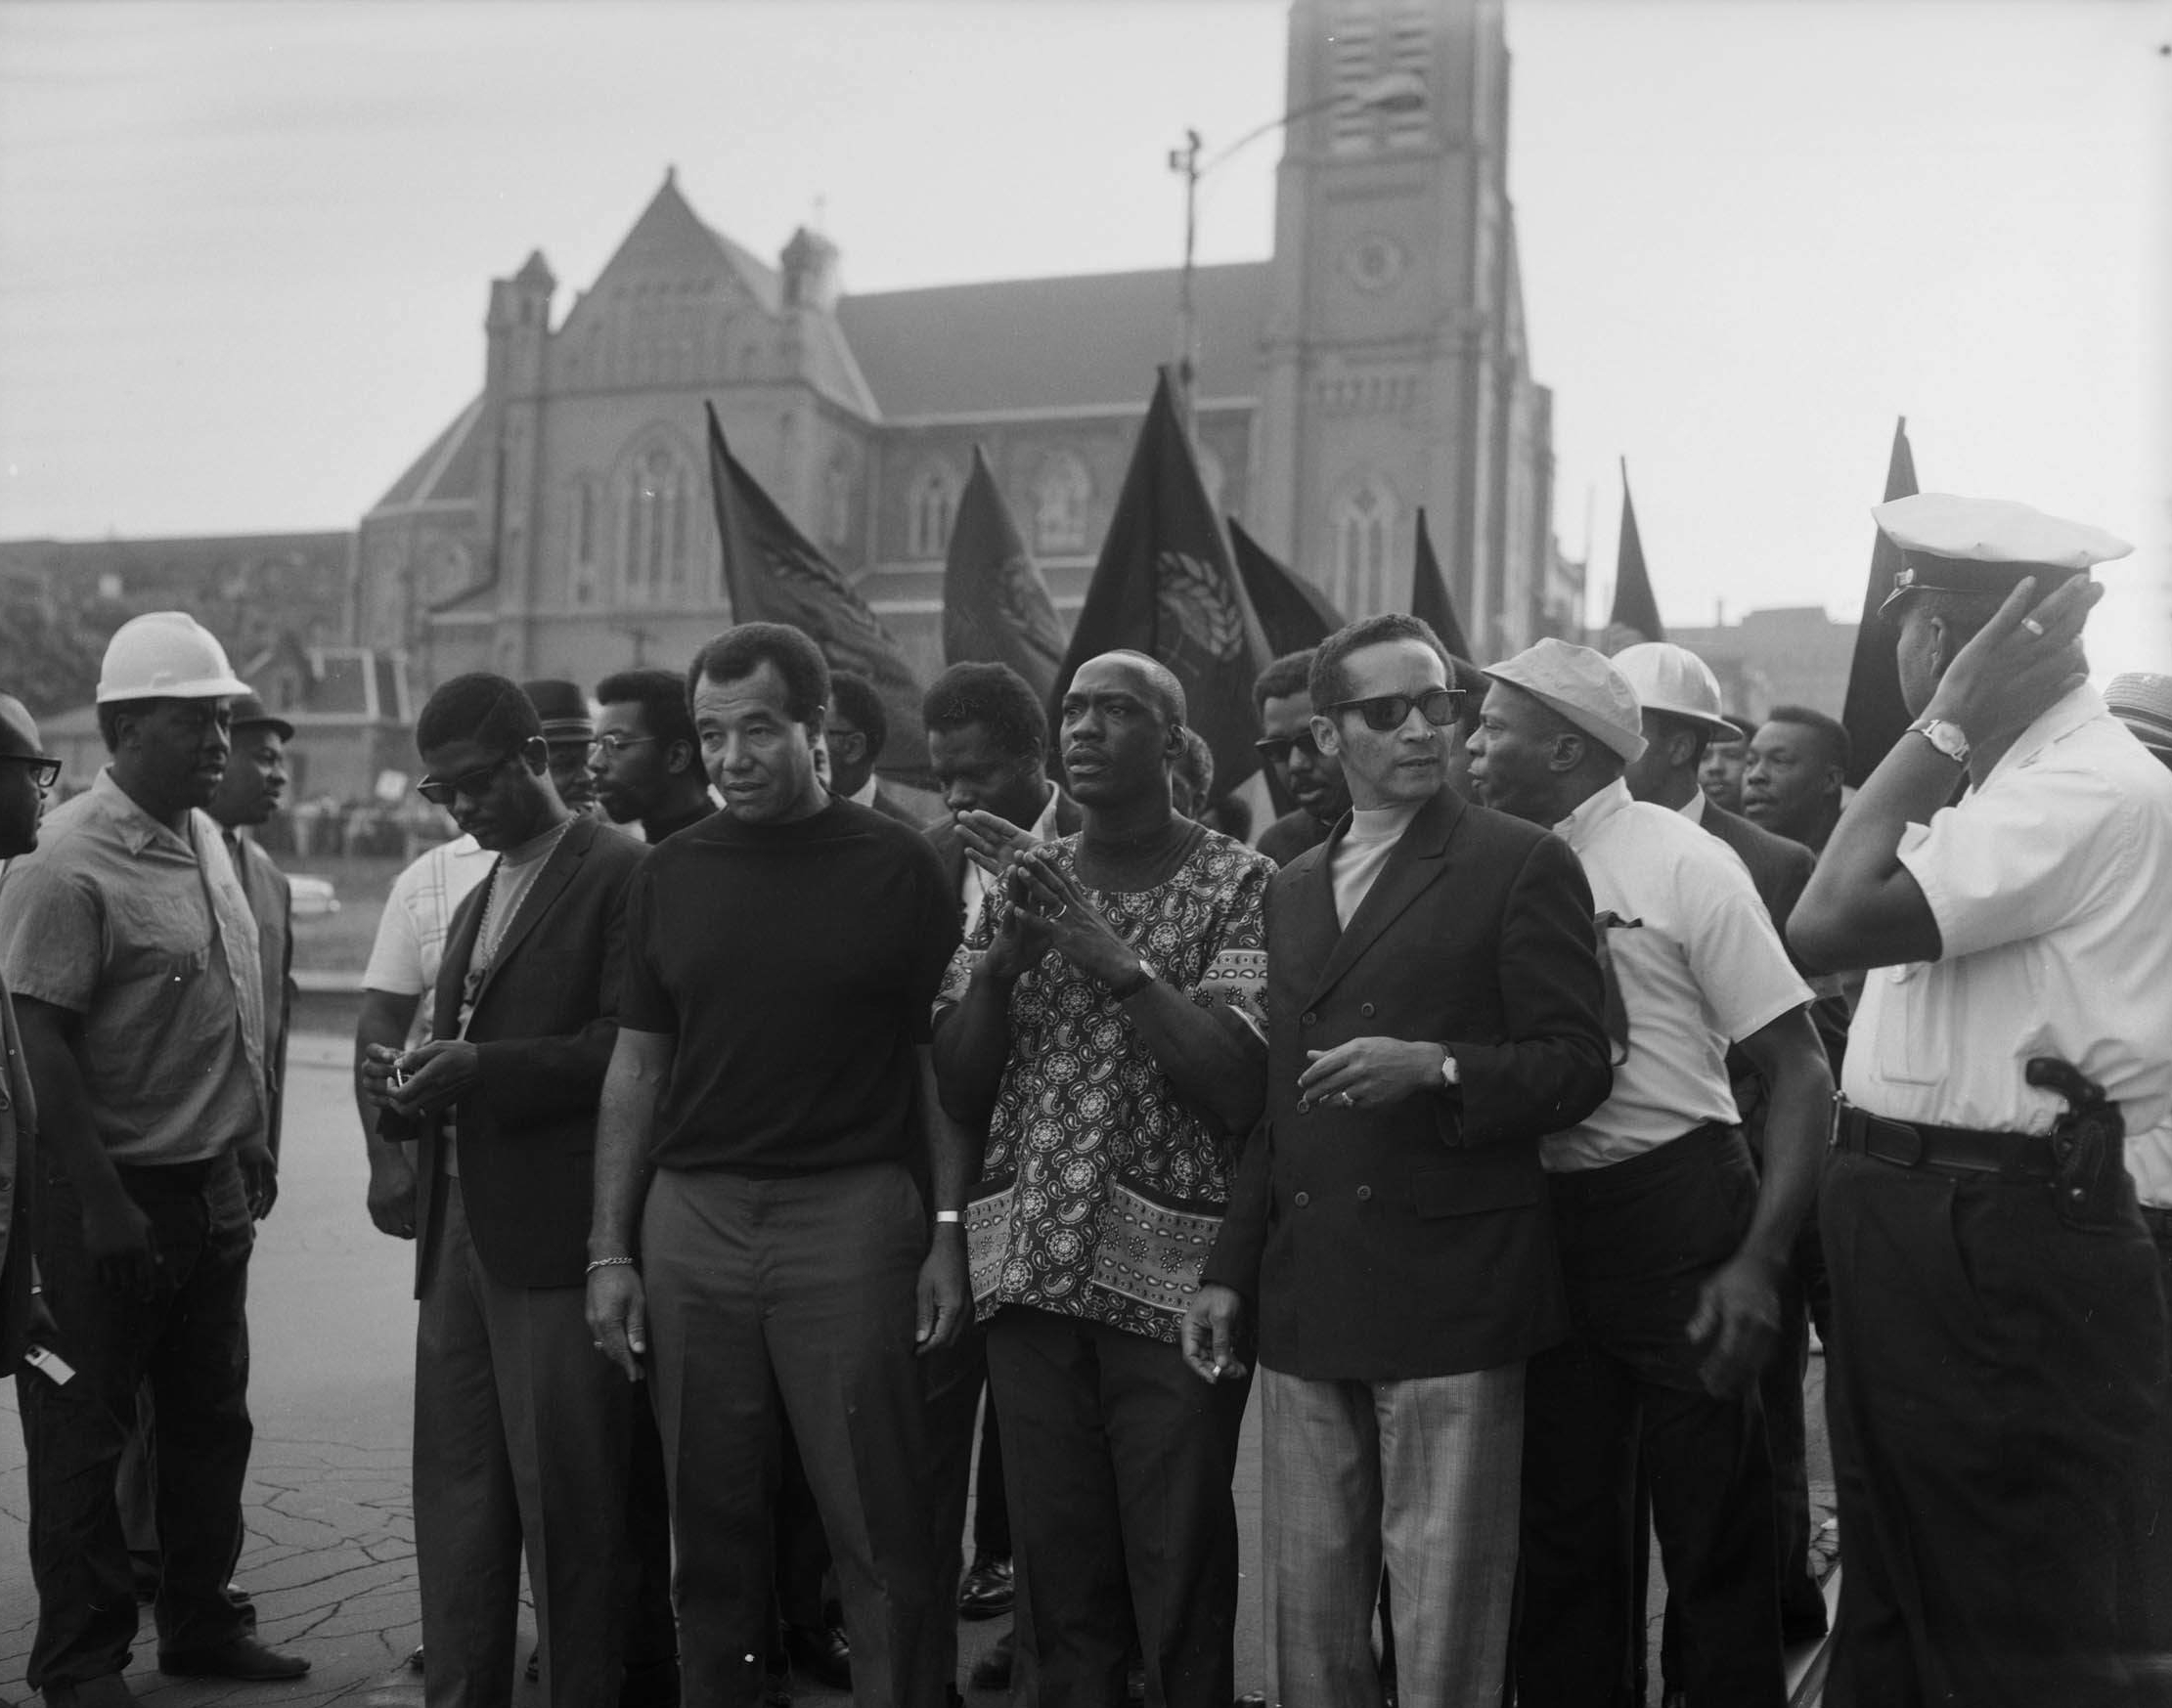 Charles Teenie Harris Photographs Civil Rights Perspectives Exhibition Image